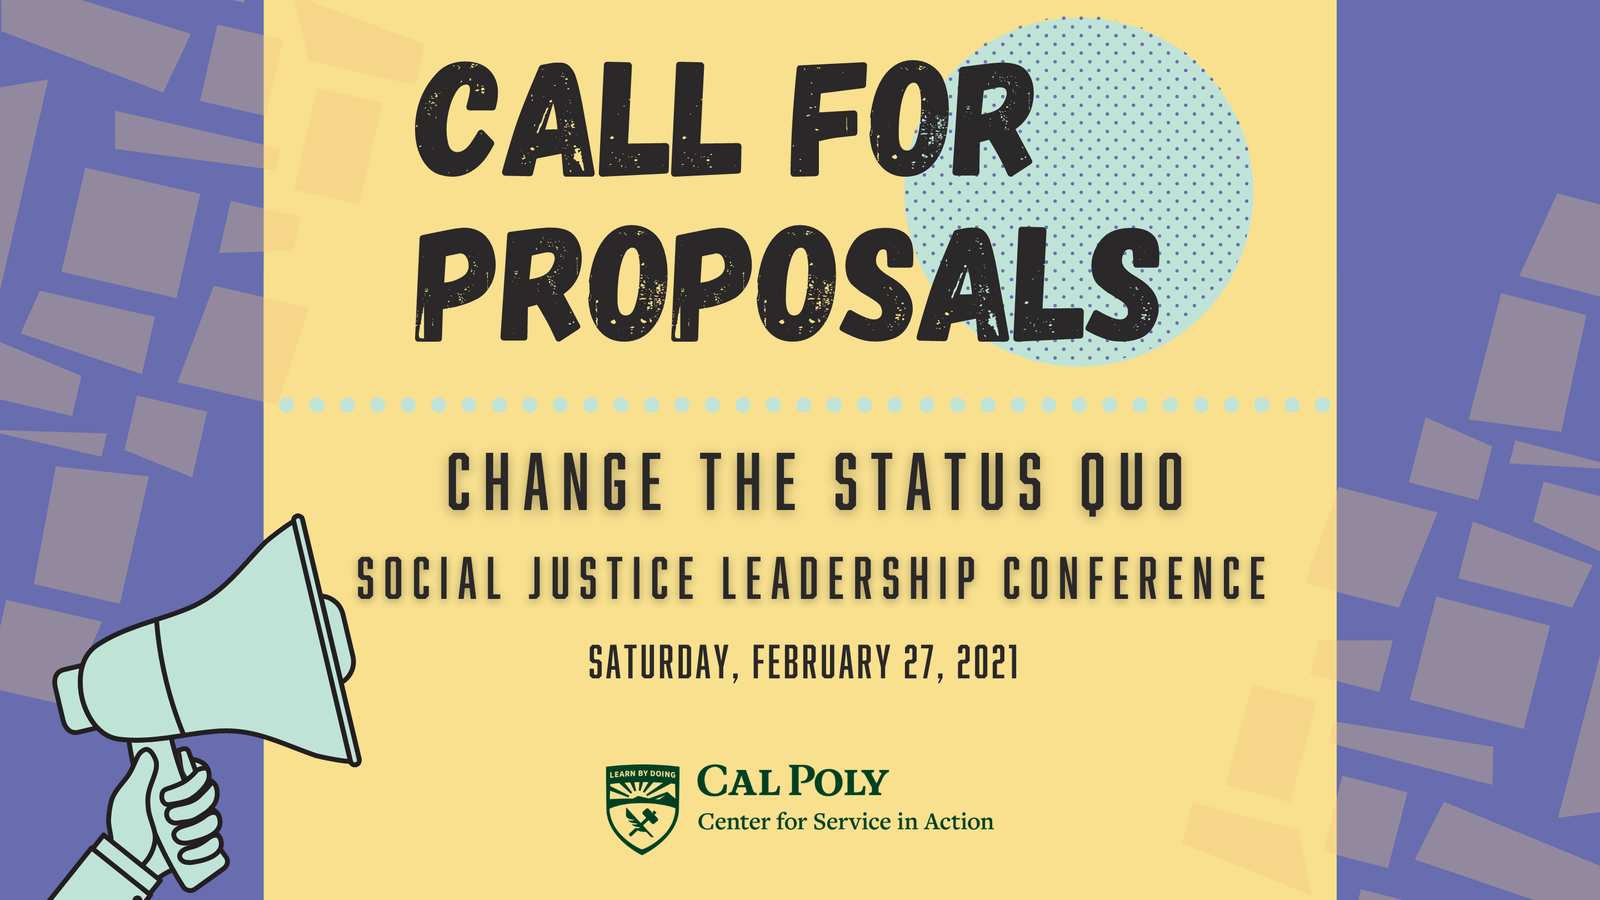 Call for Proposals Change the Status Quo Social Justice Leadership Conference on Sunday, February 27, 2021